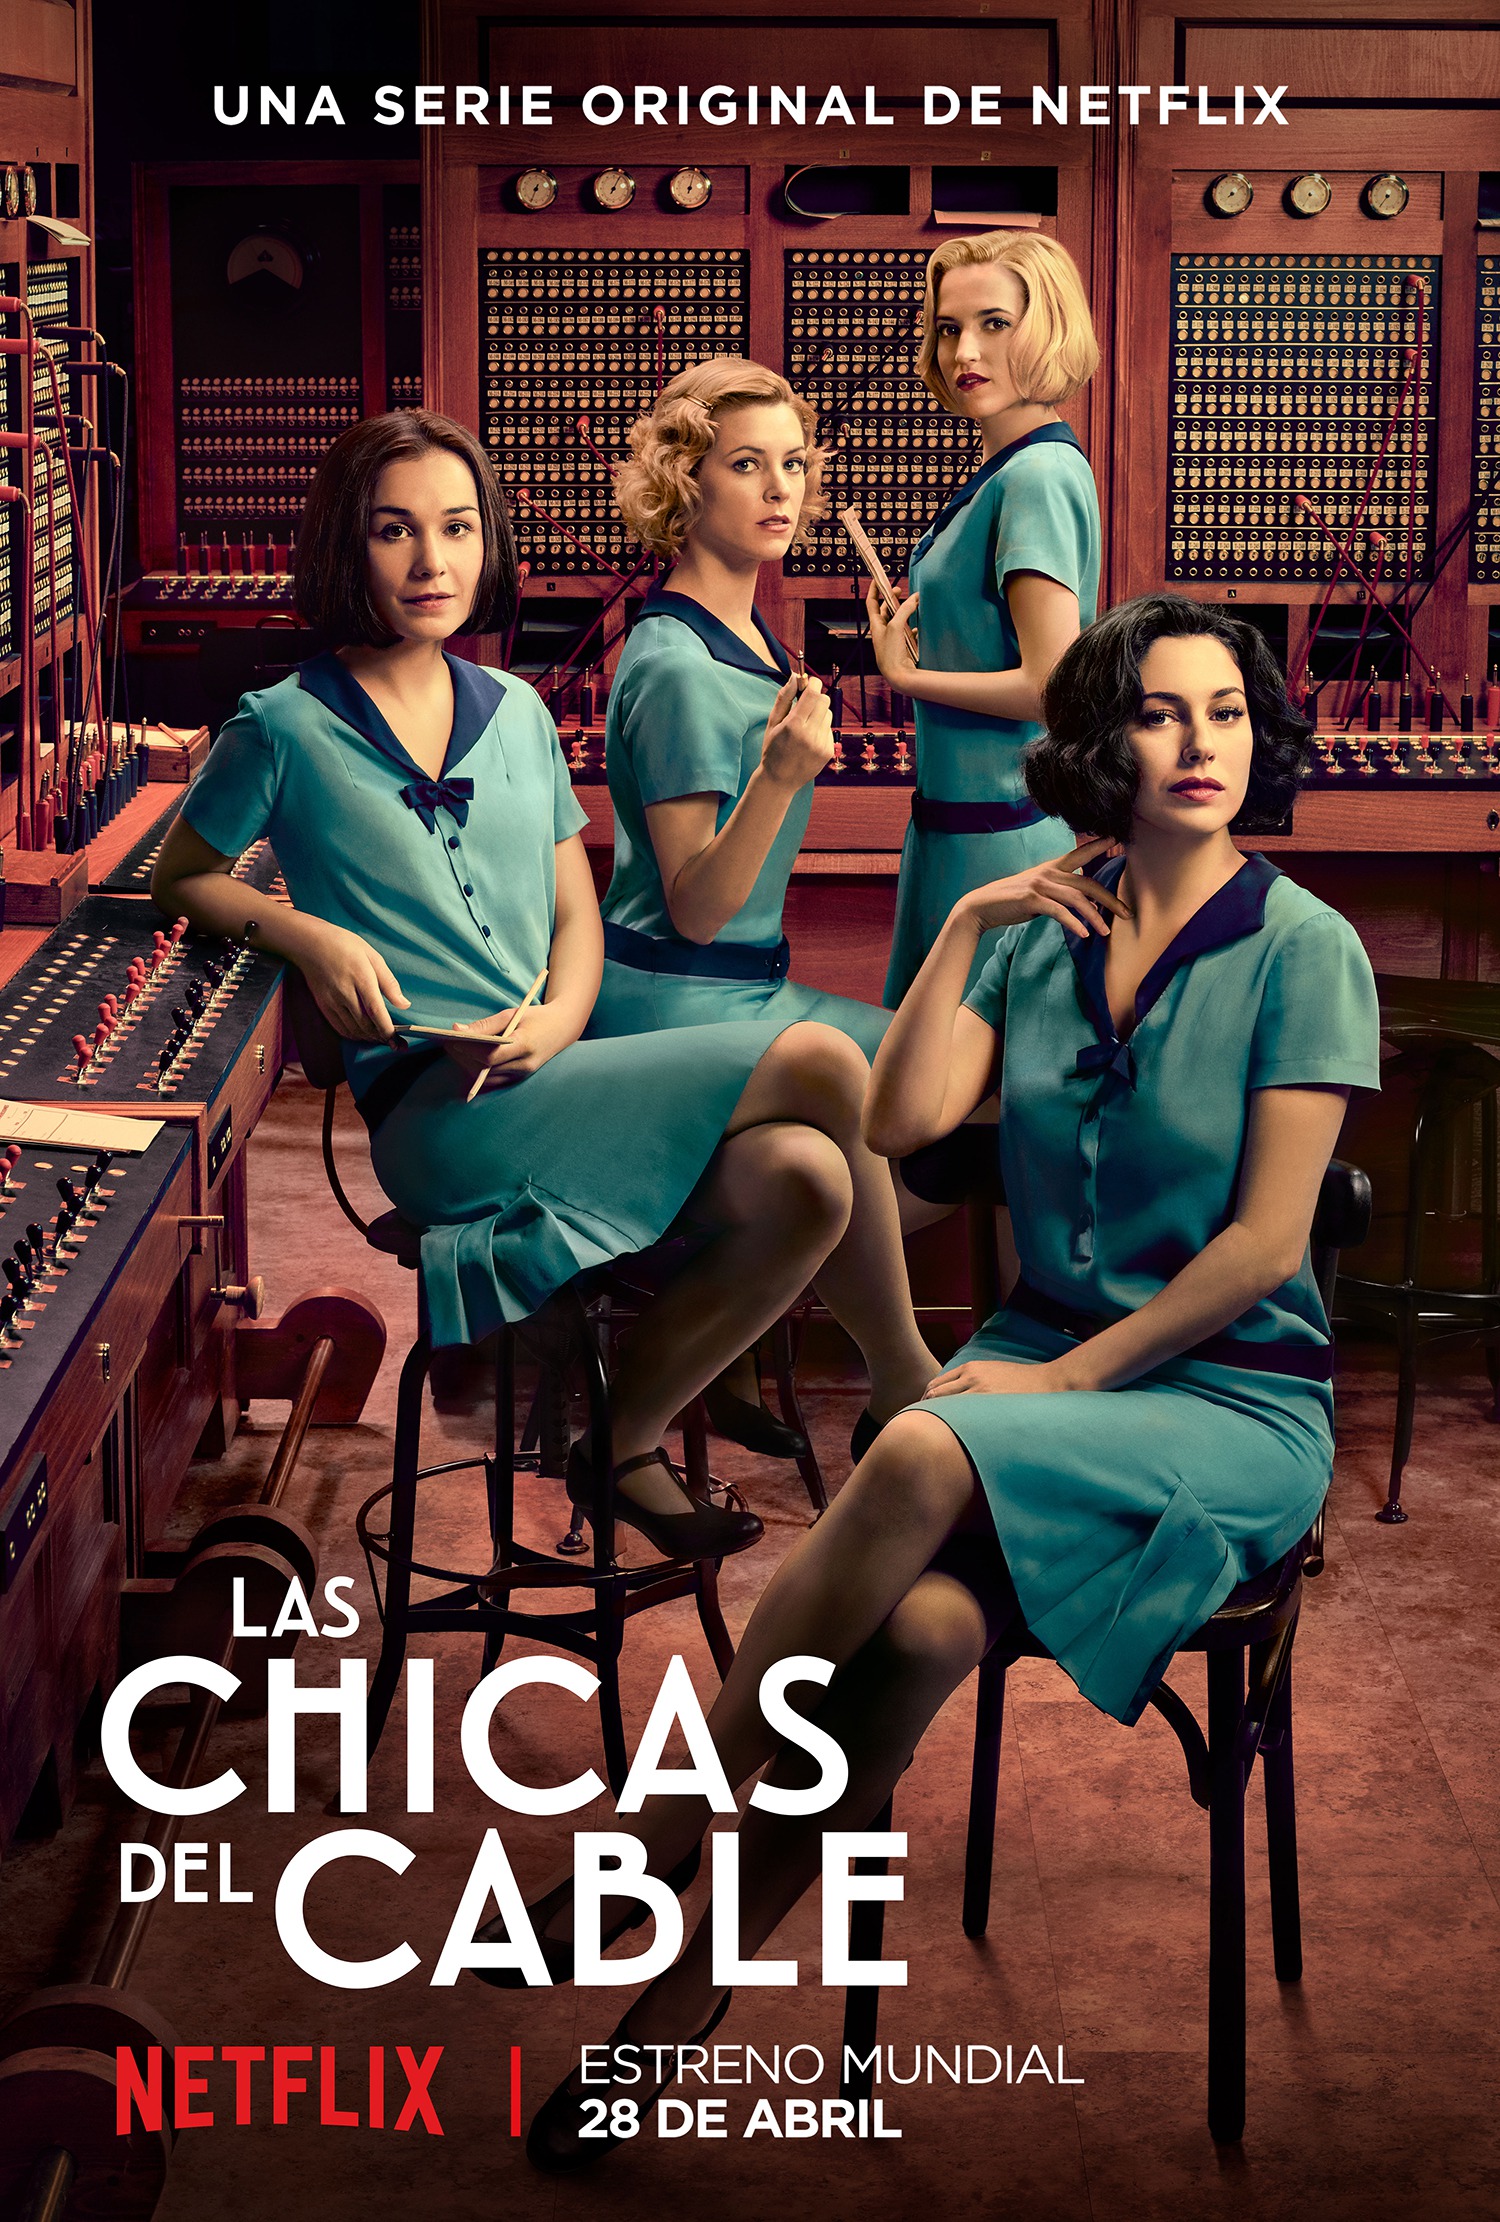 Mega Sized TV Poster Image for Las chicas del cable (#1 of 7)